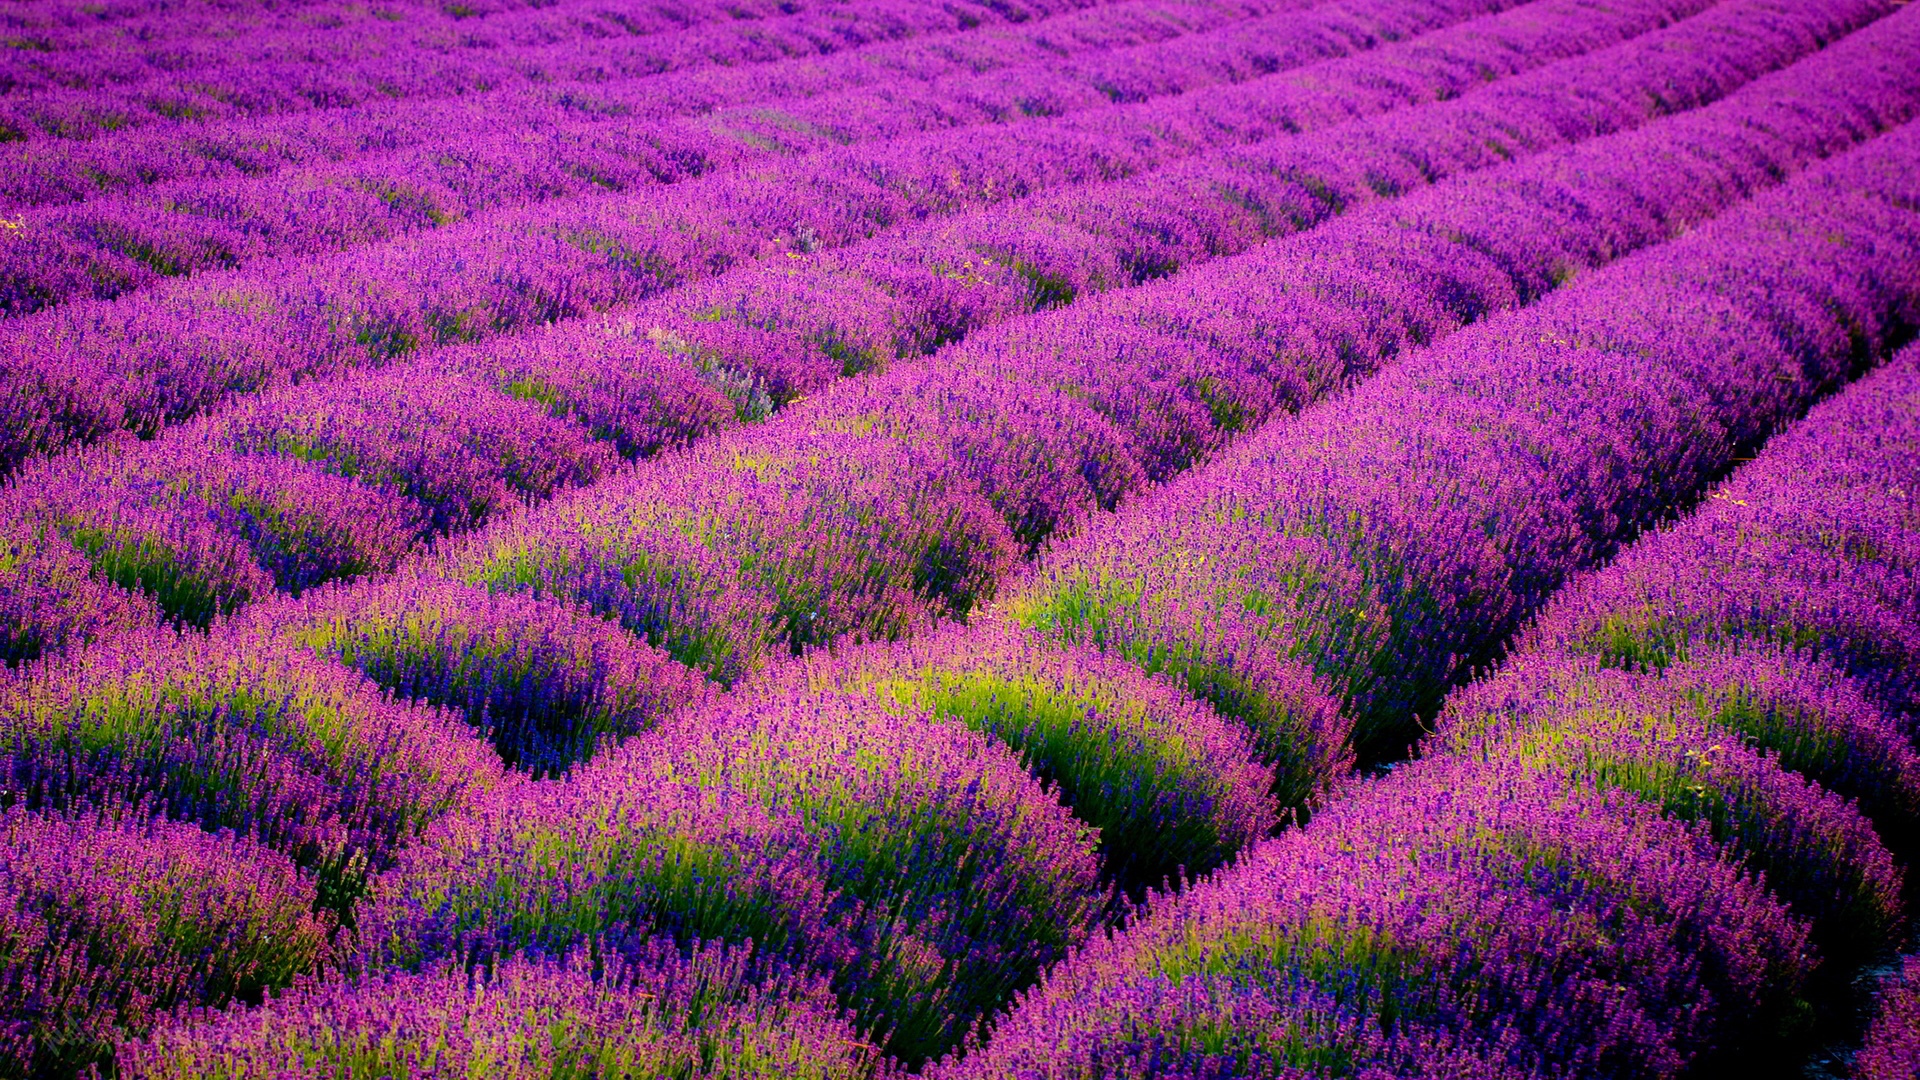 Lavender Field Wallpaper High Definition Quality